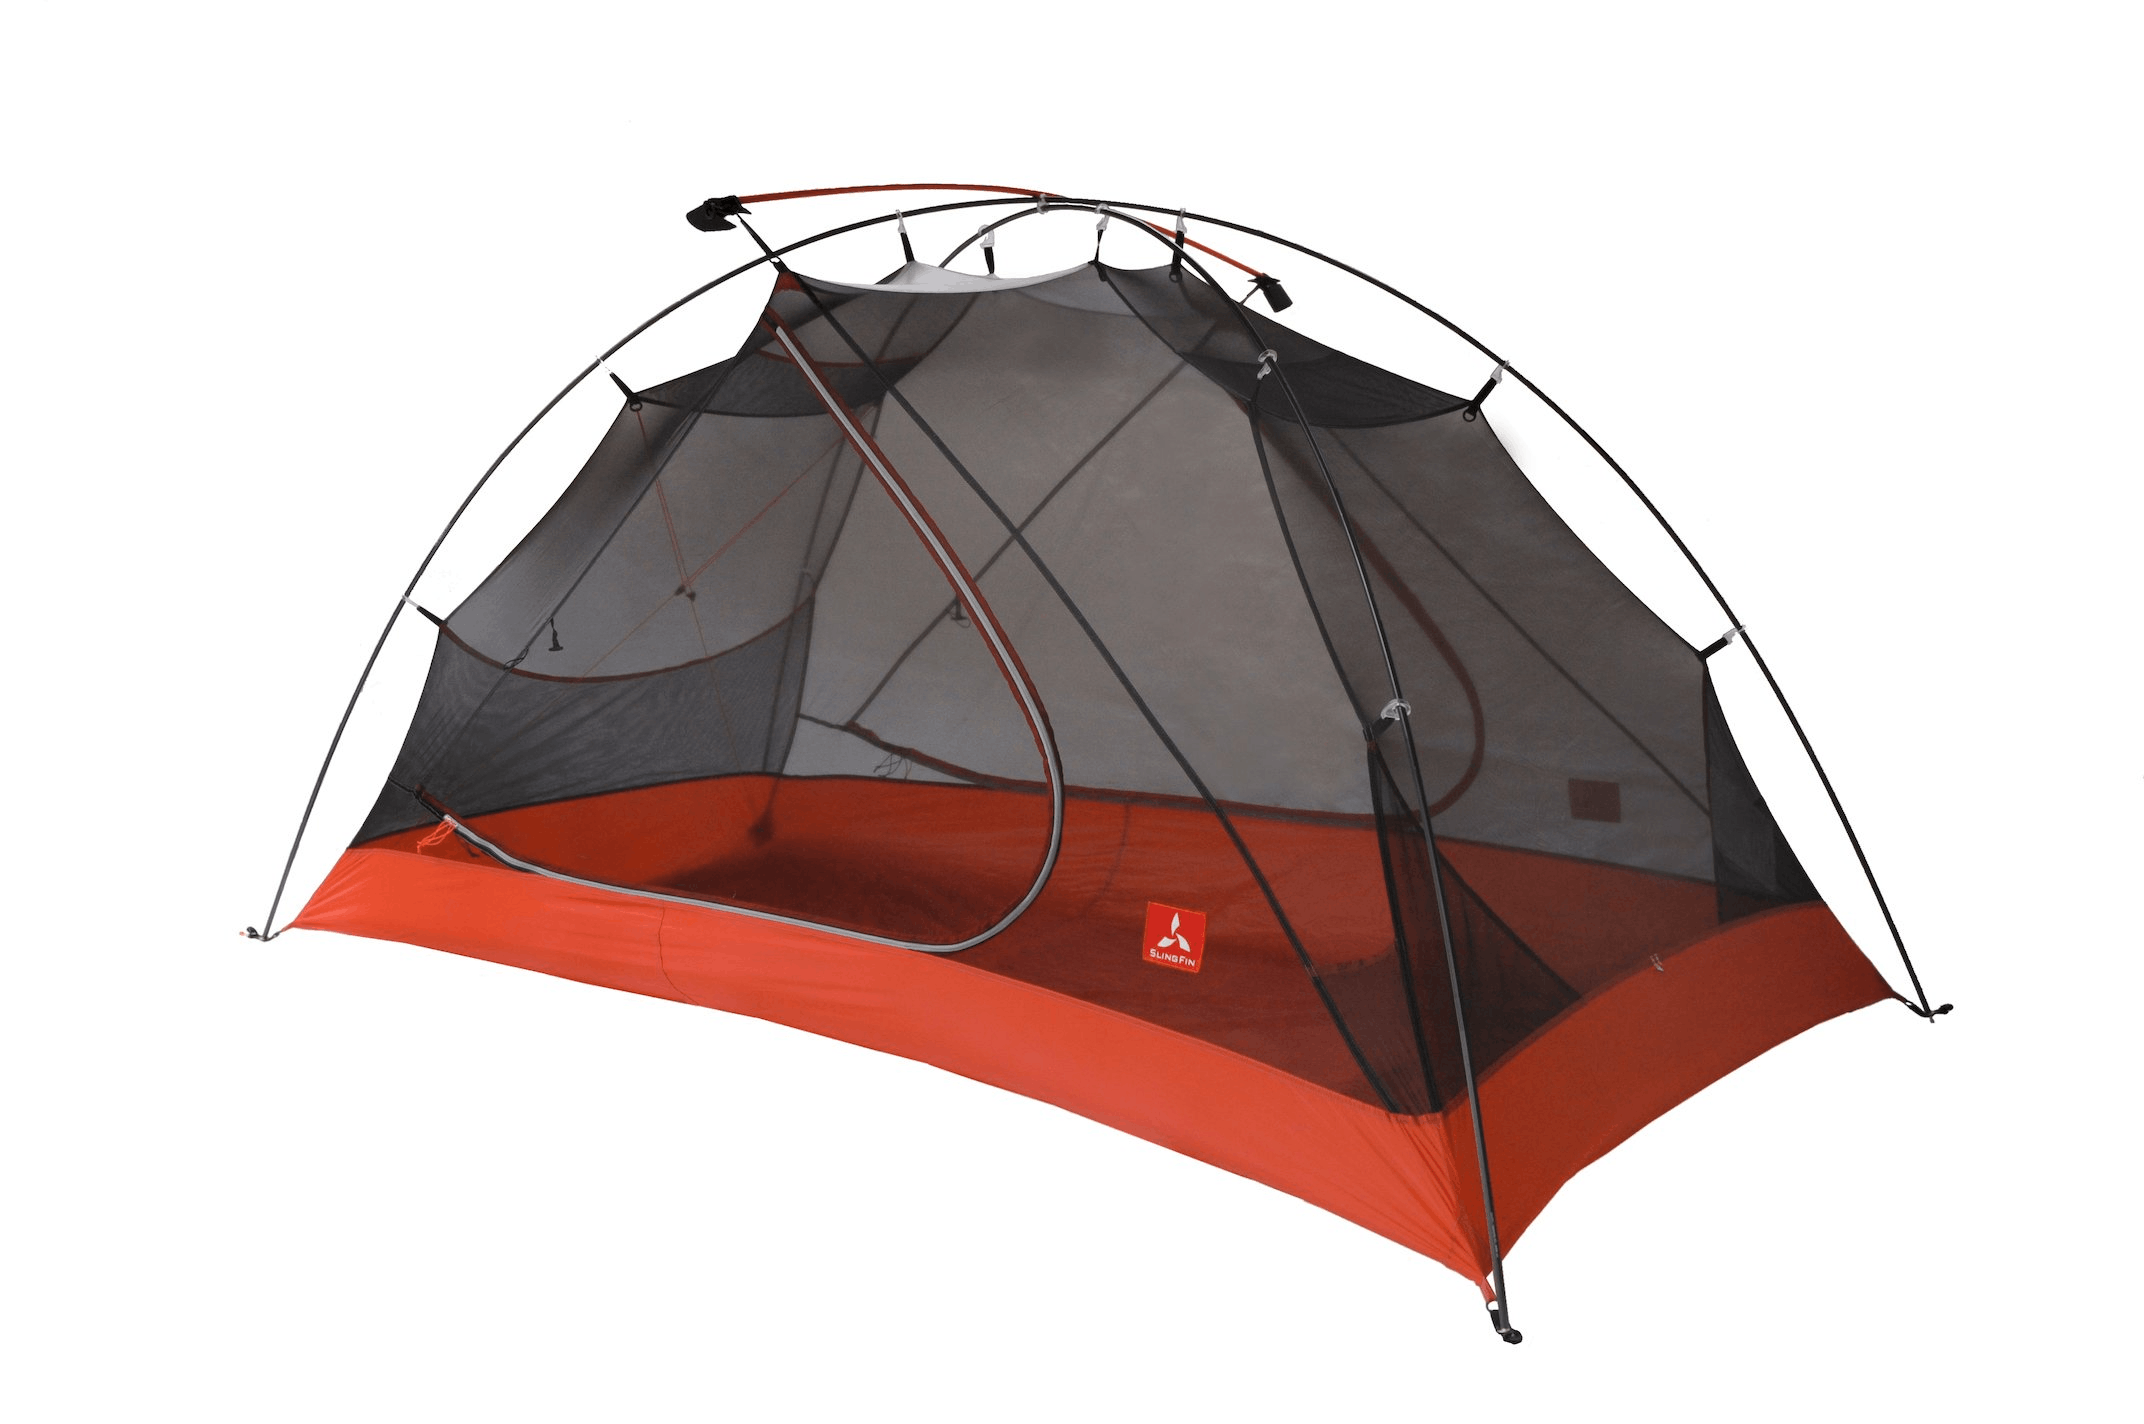 Product image of the Slingfin Portal Tent.